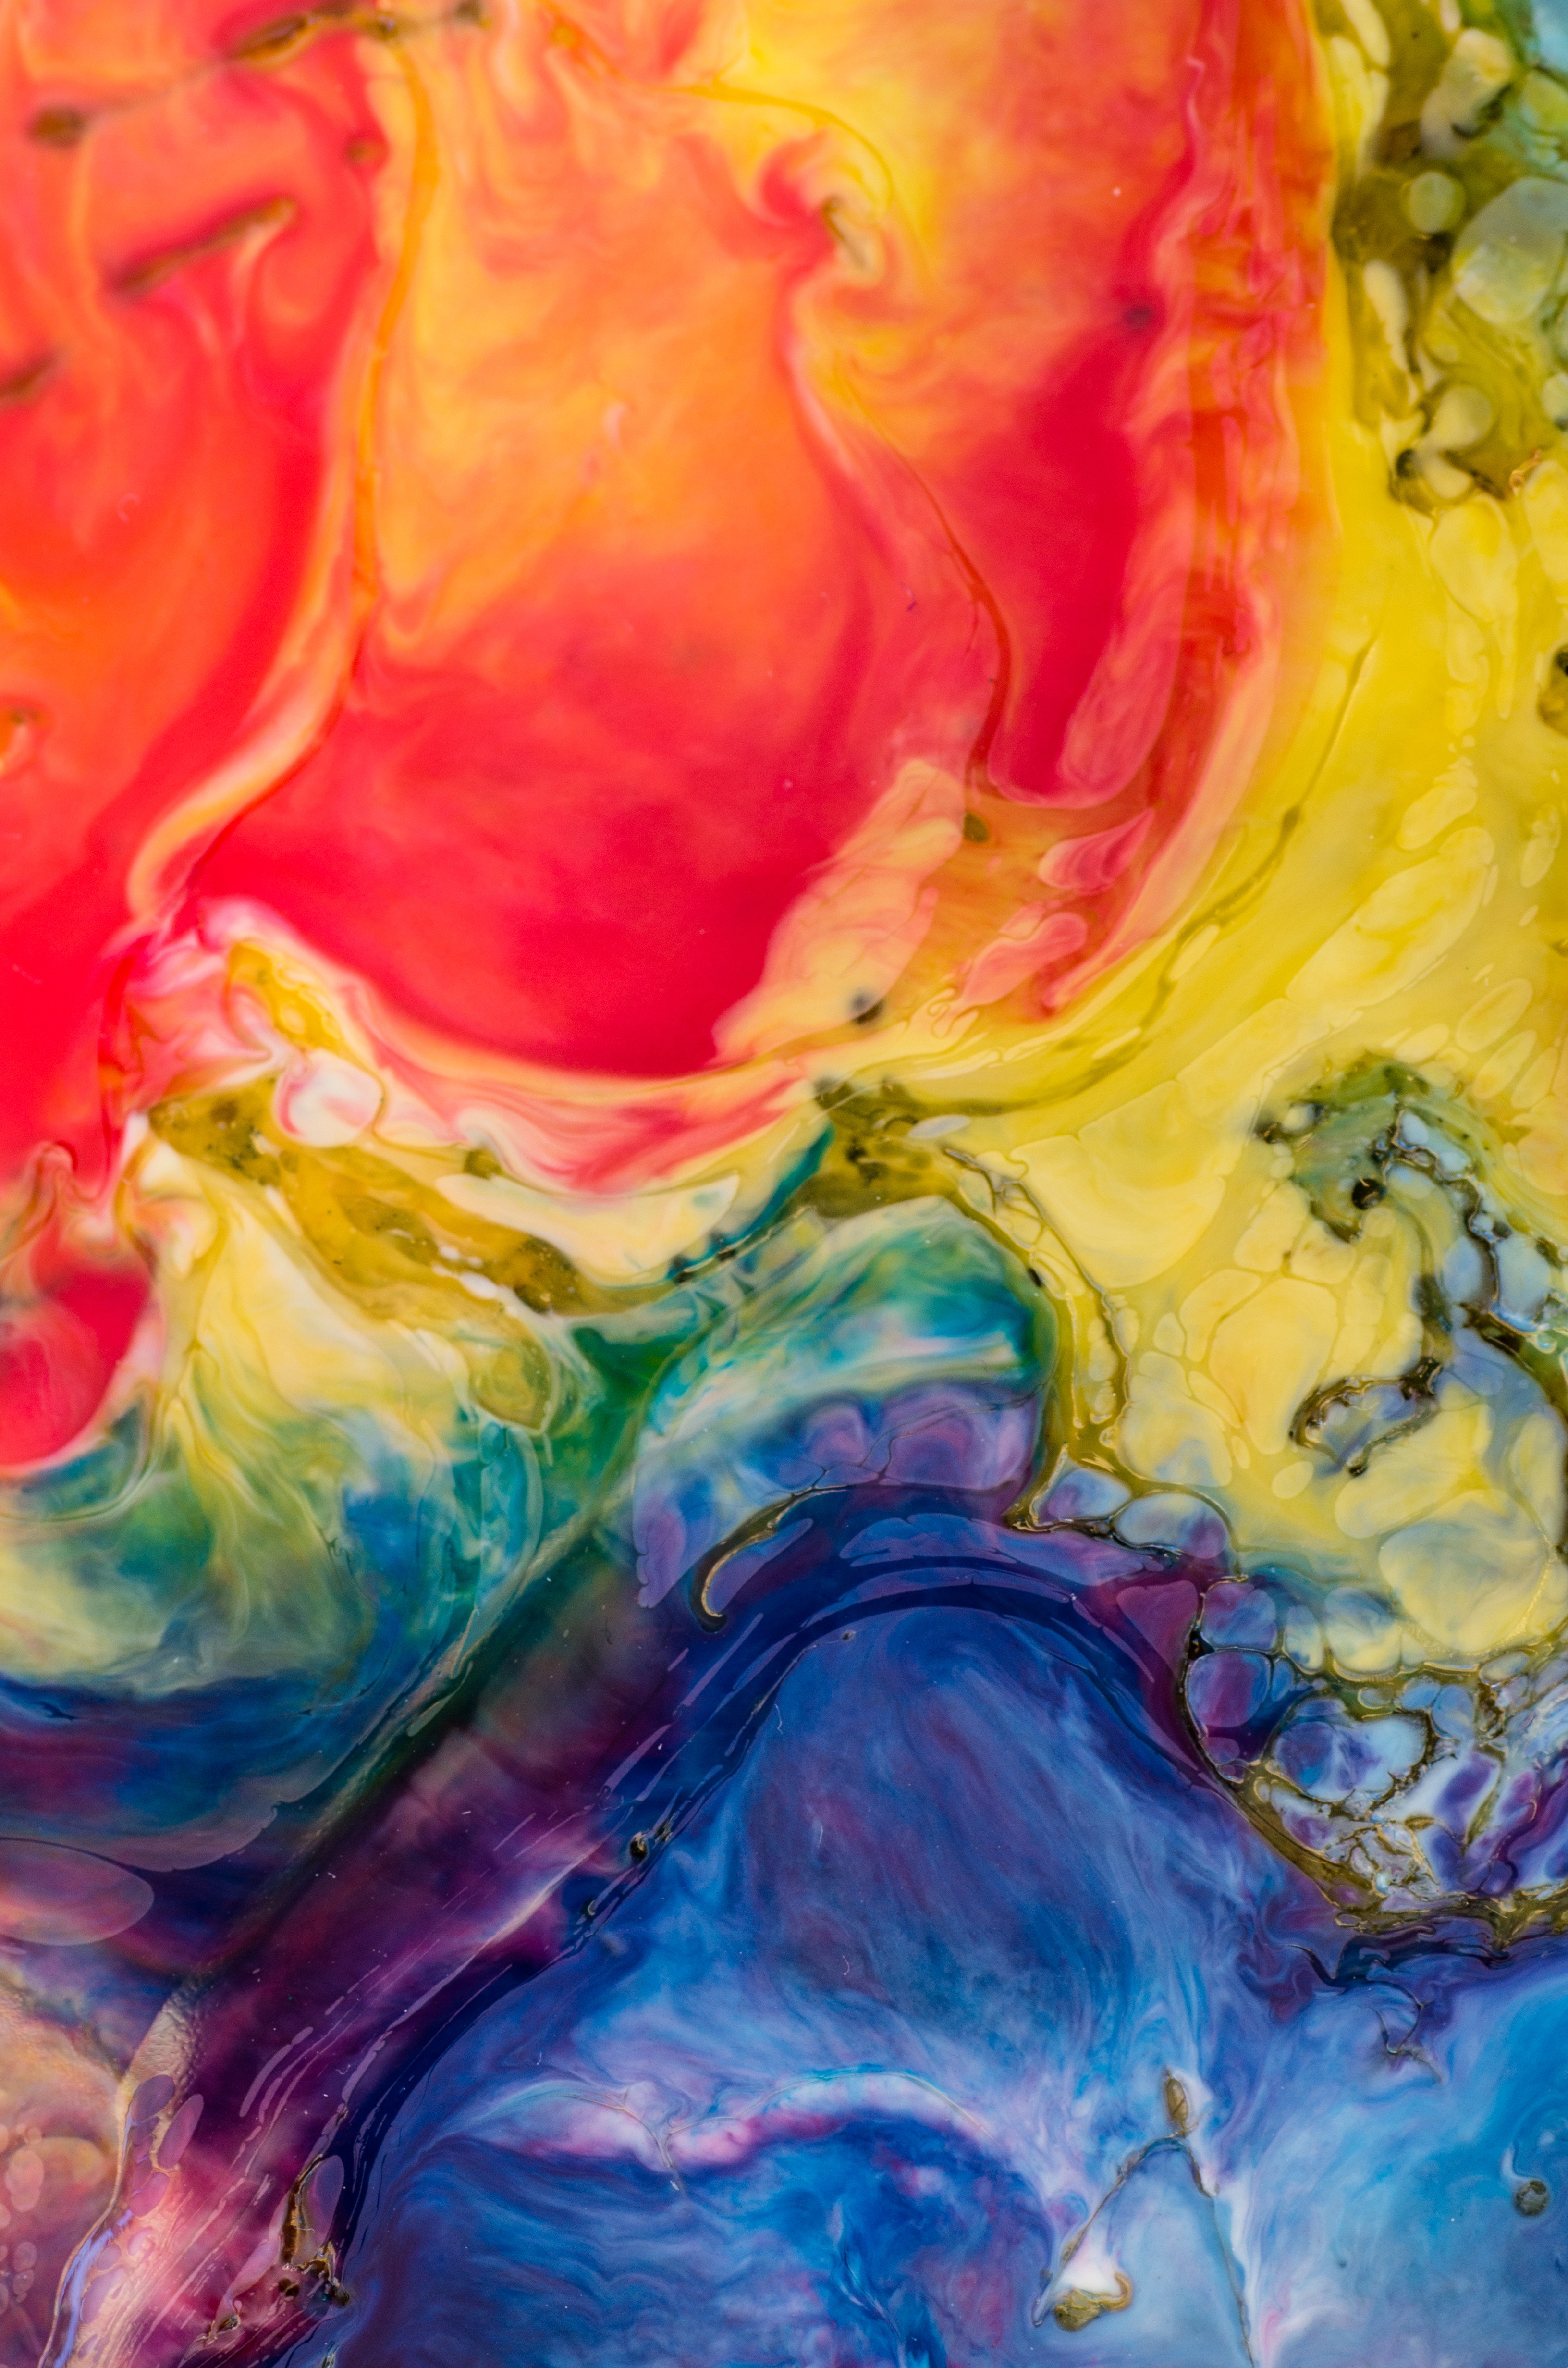 colourful, spots, paint, colorful, motley, abstract, multicolored, stains Image for desktop